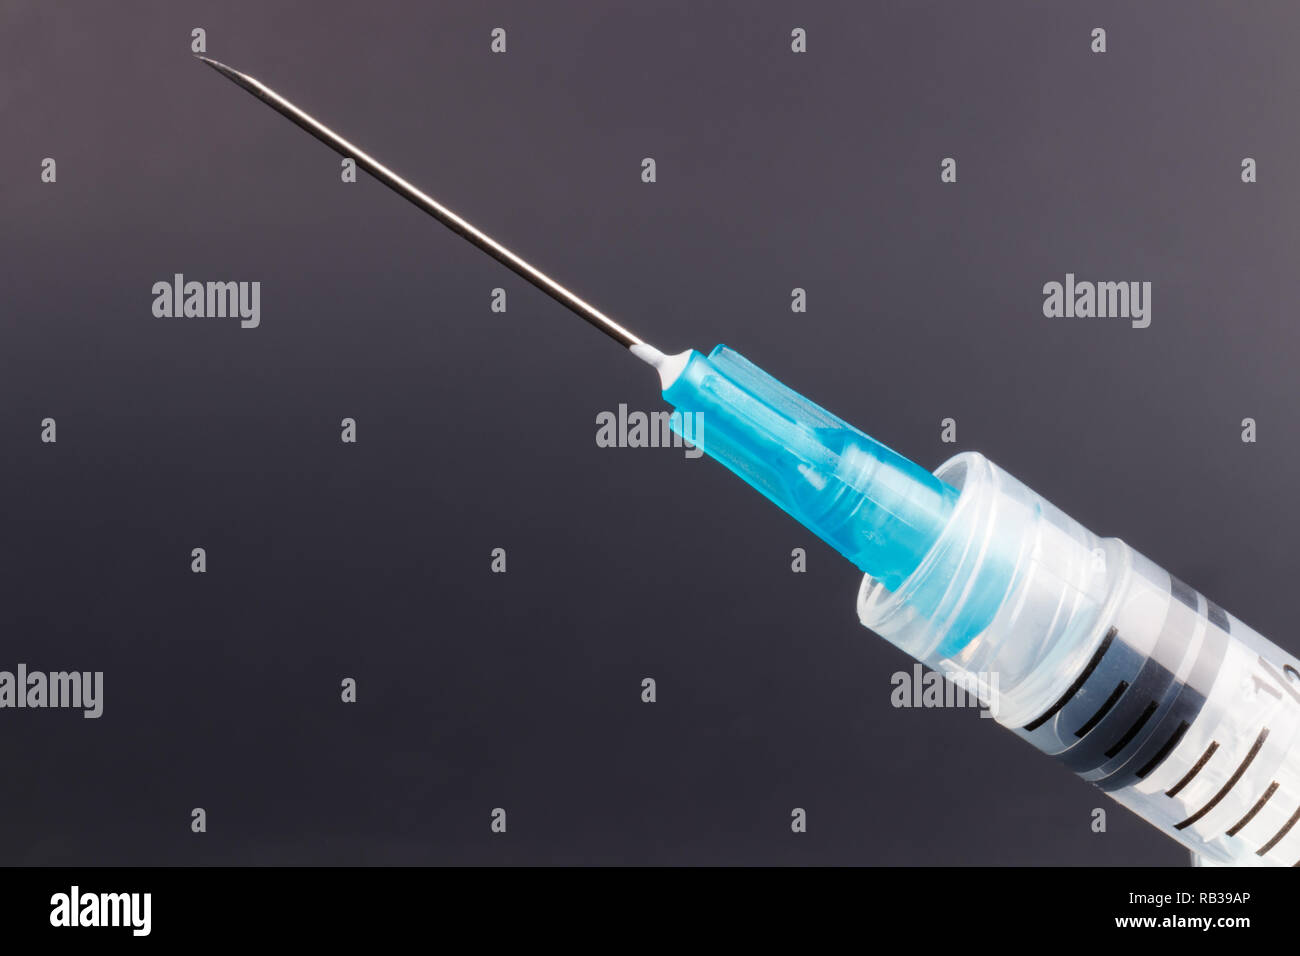 Close up view of a syringe with hypodermic needle. Opiate and heroin overdoses have skyrocketed in recent years I Stock Photo